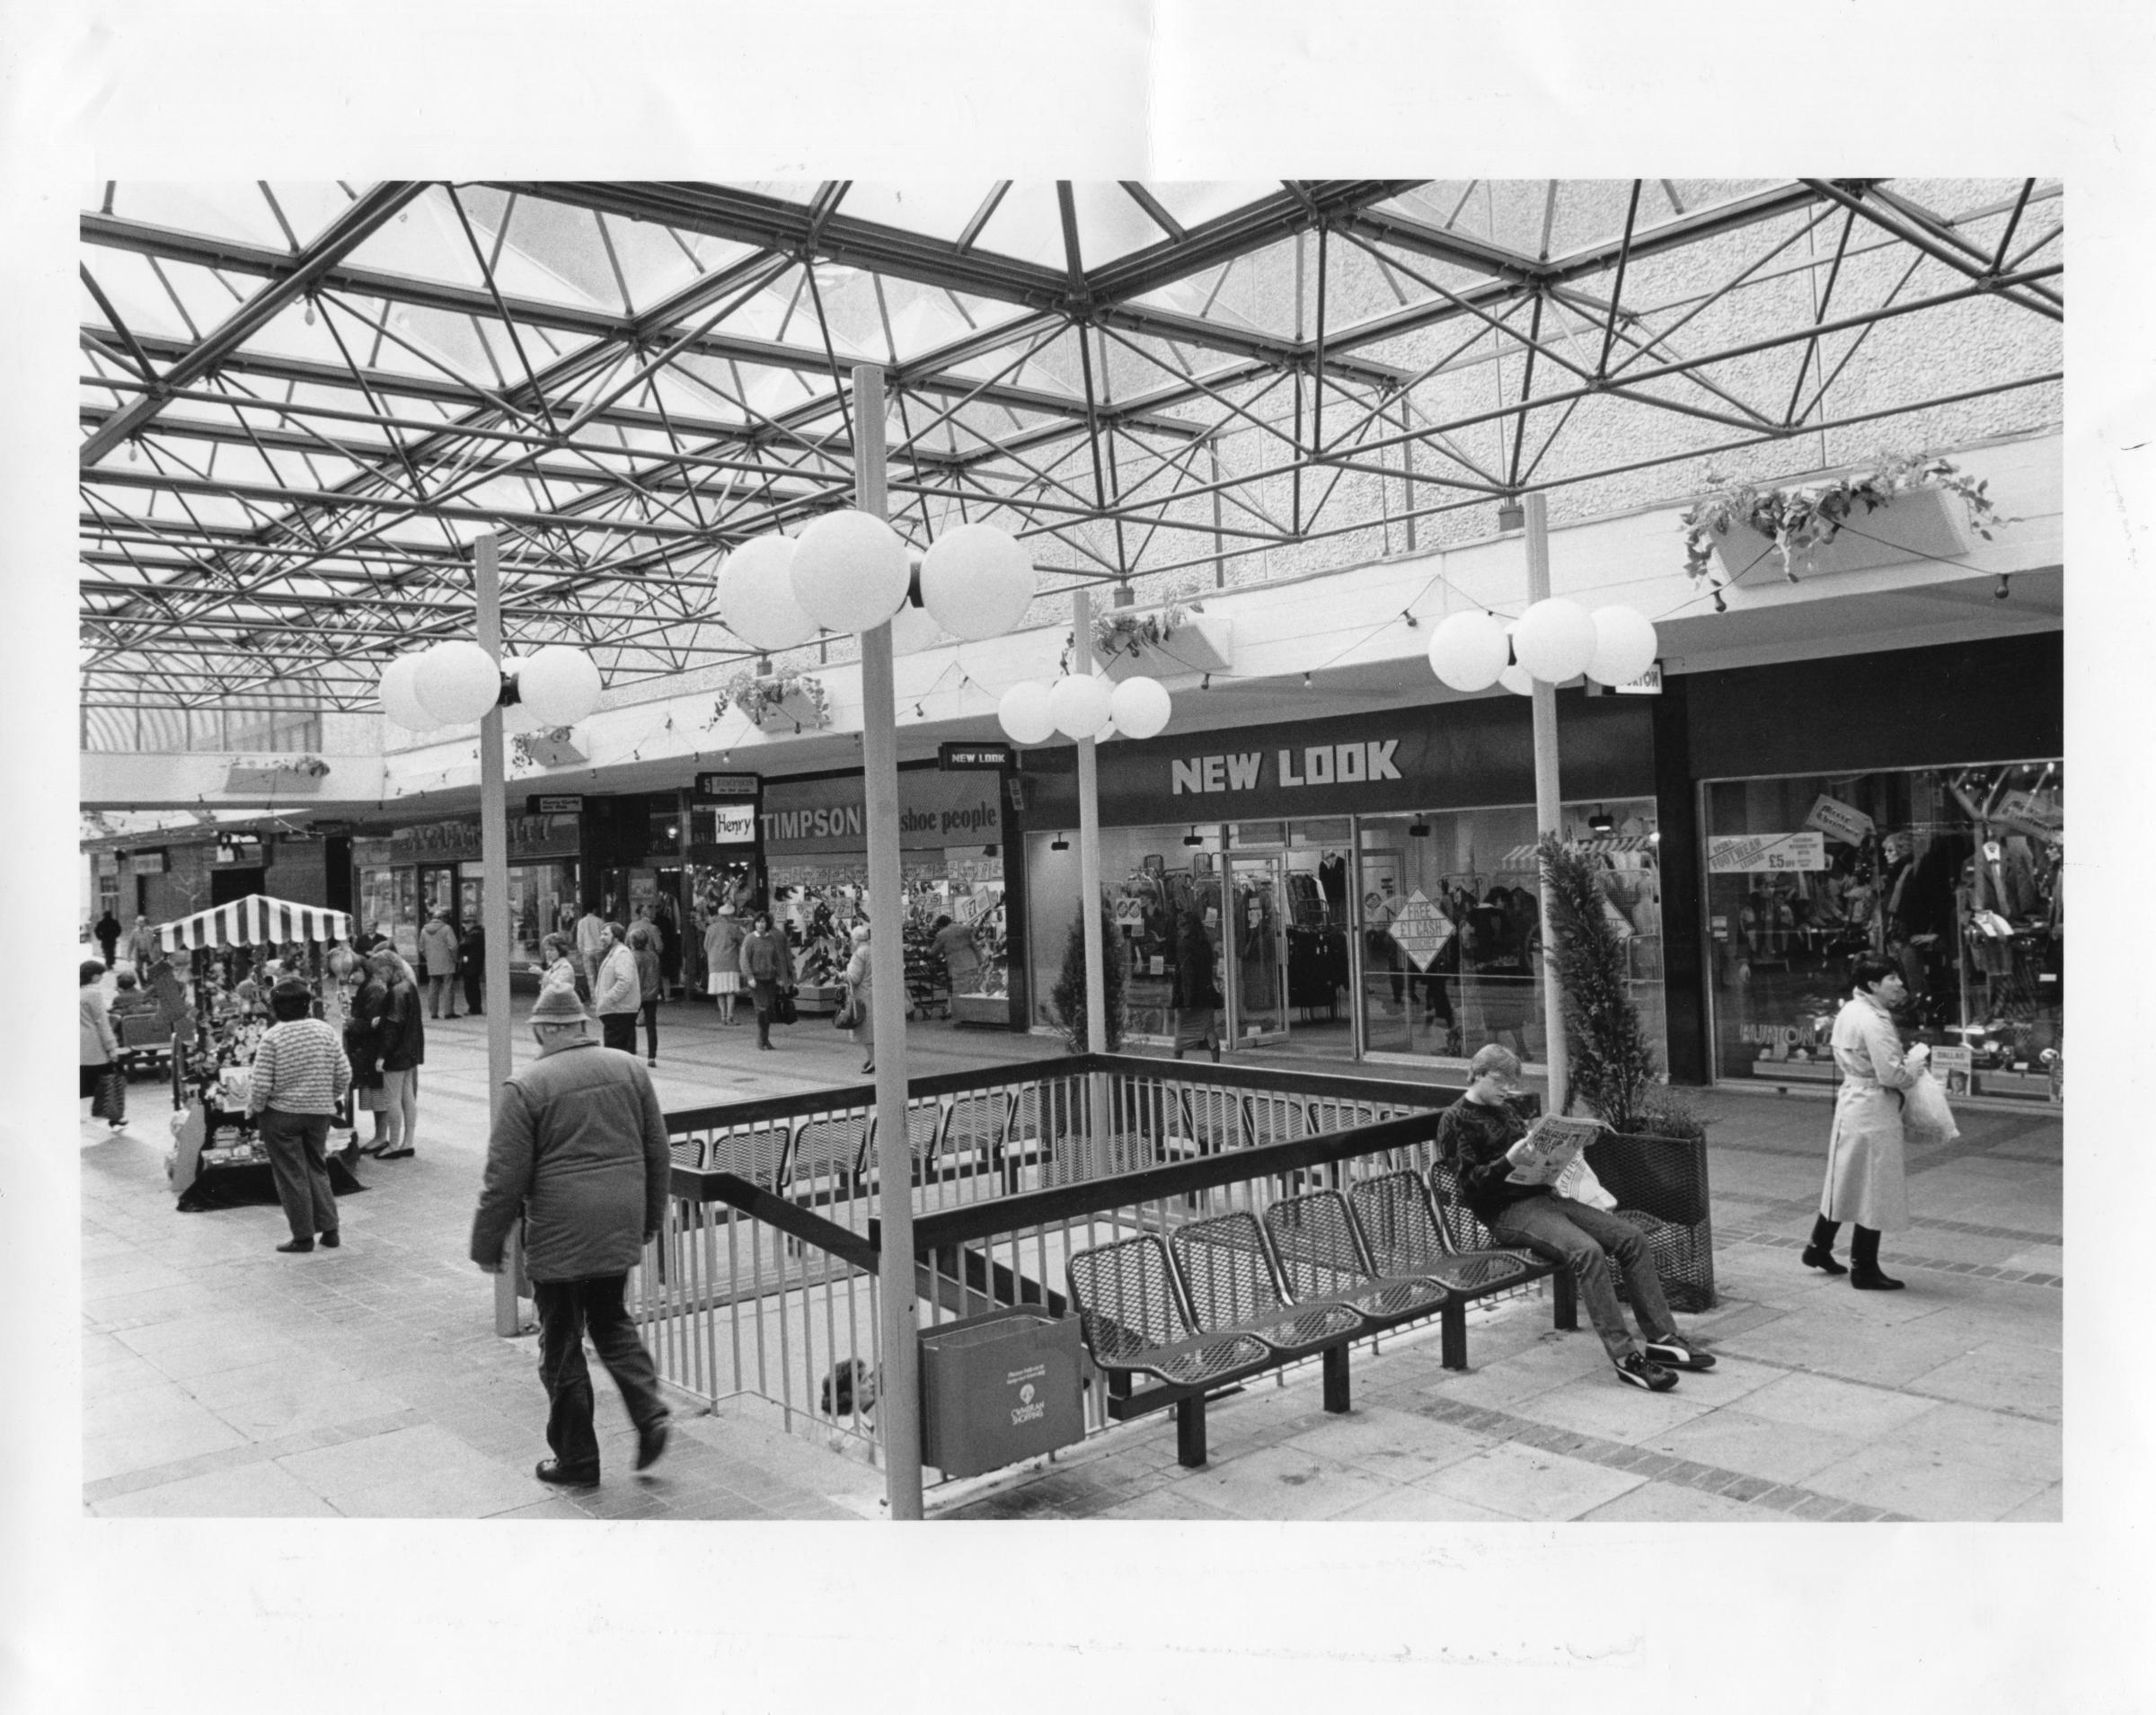 Cwmbran Shopping Centre in 1987